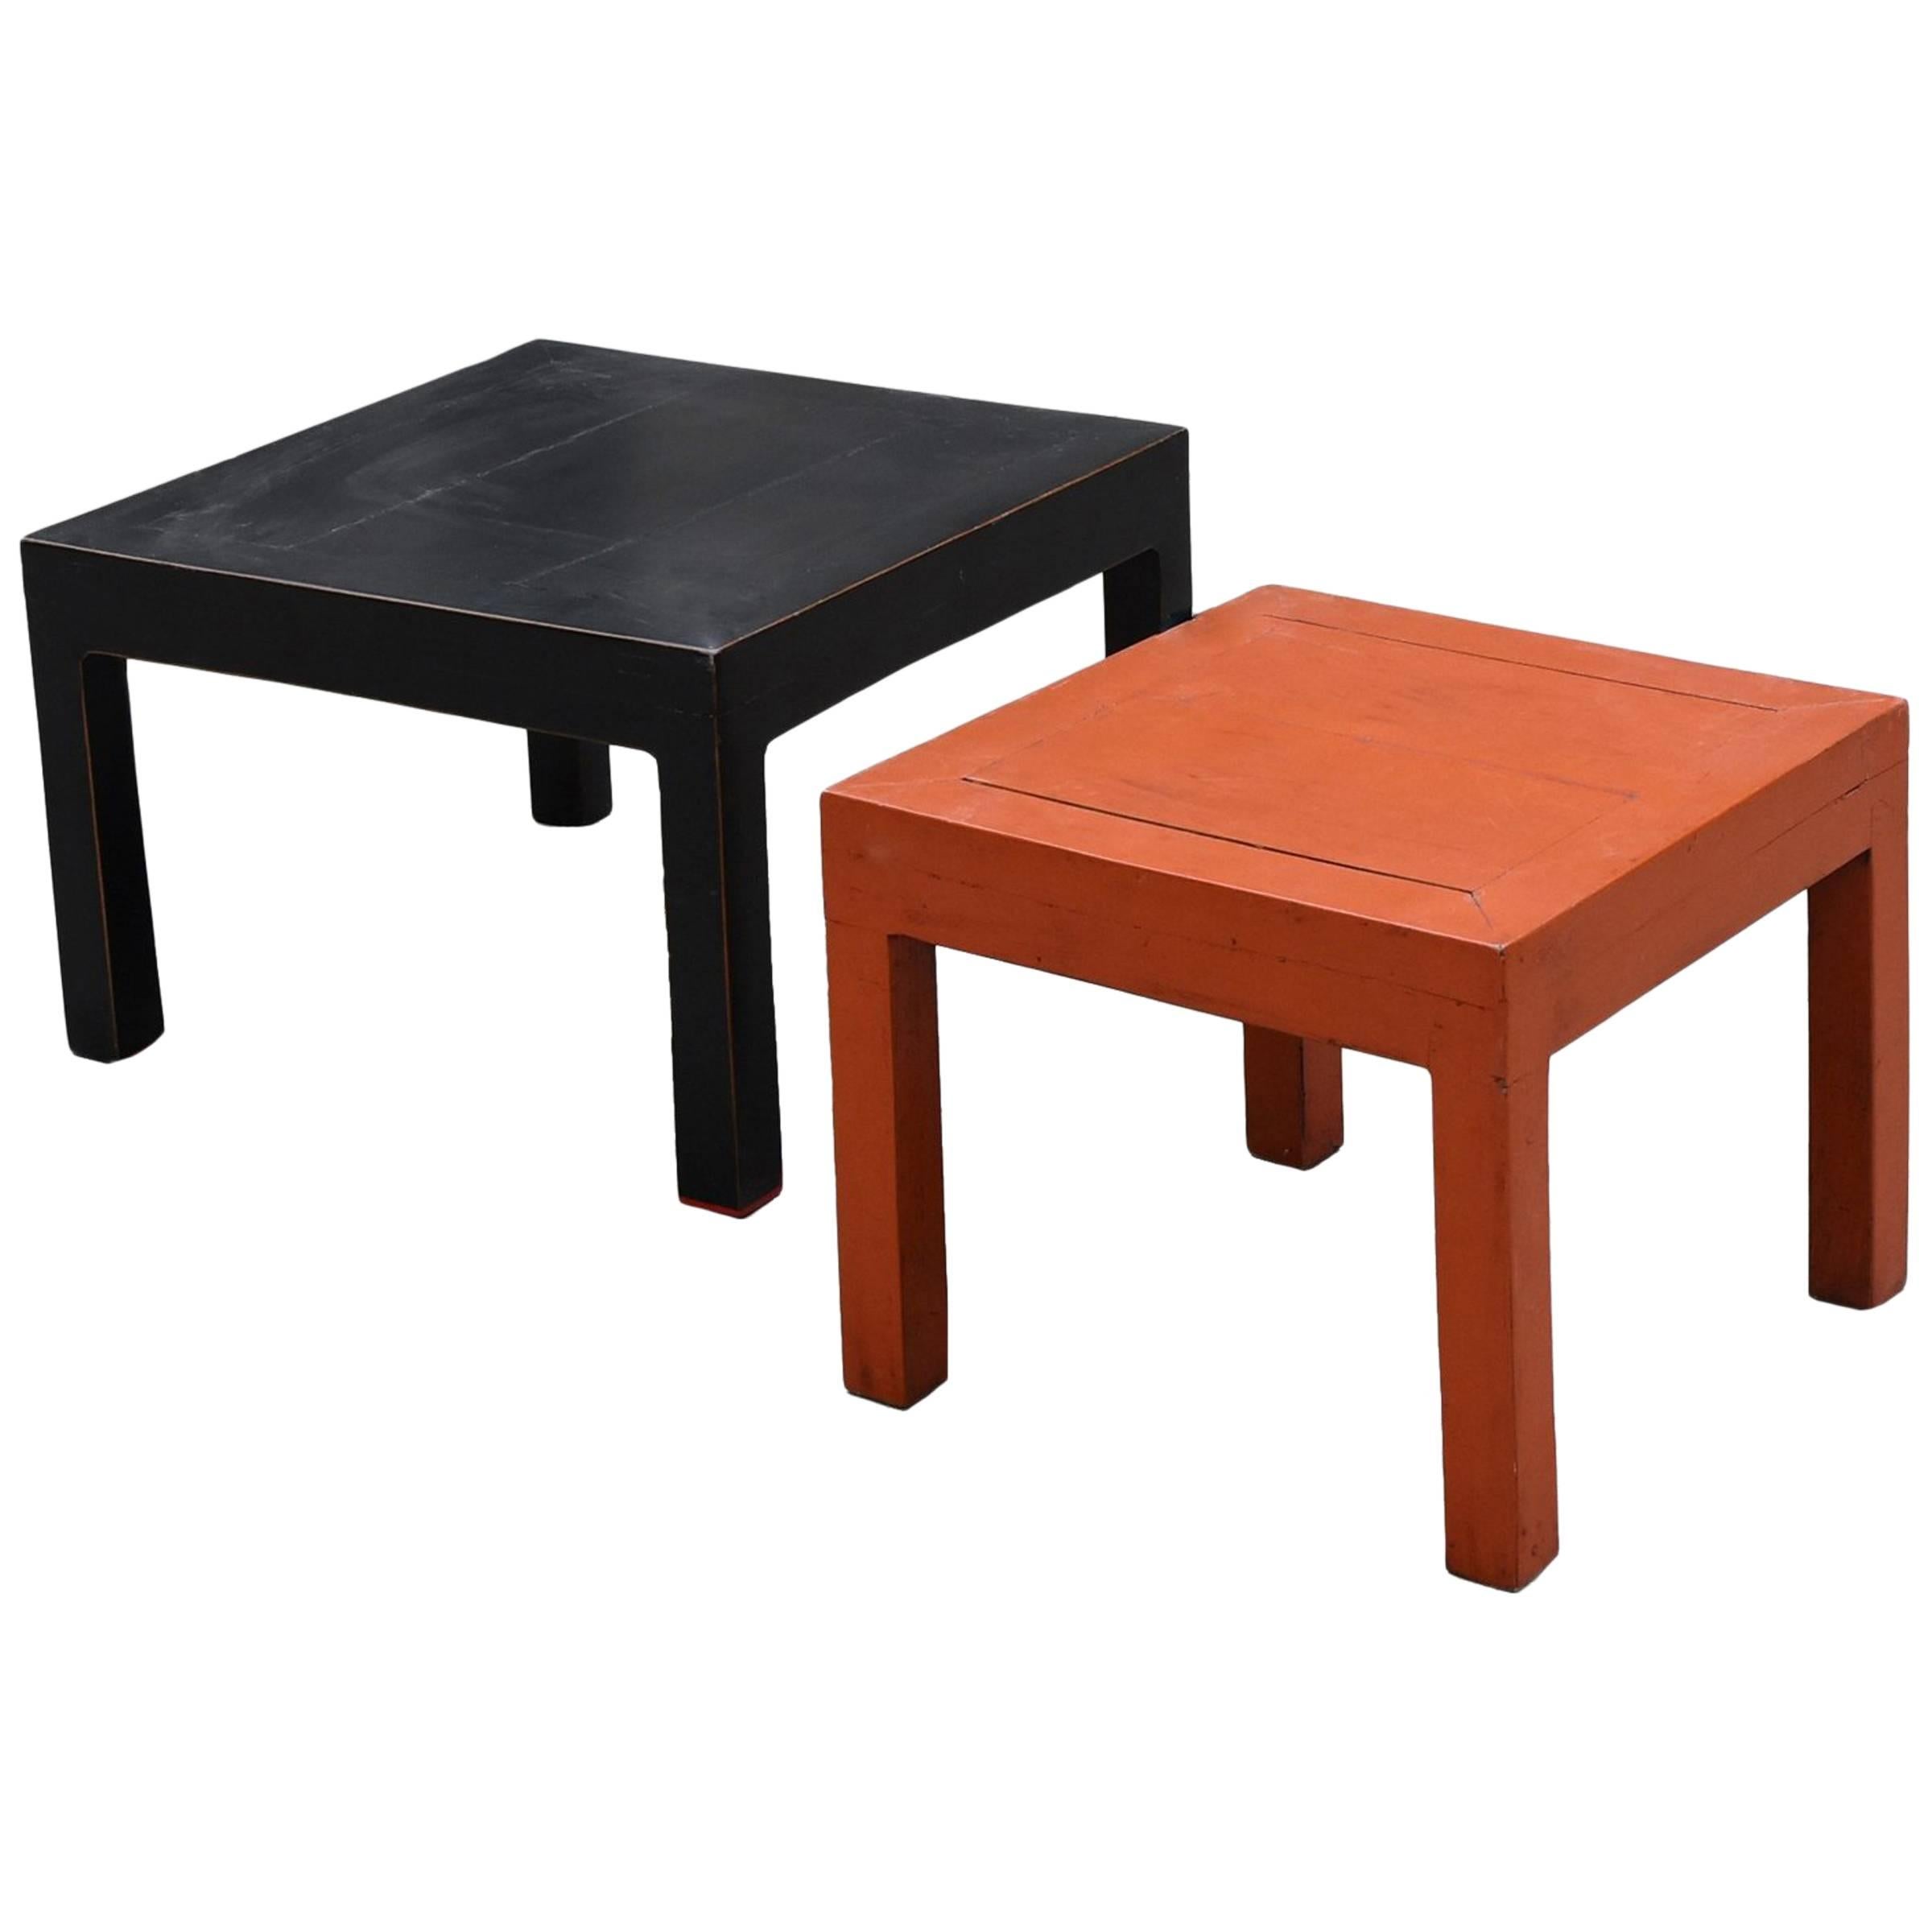 Orange and Black Two Parsons Tables Stools For Sale